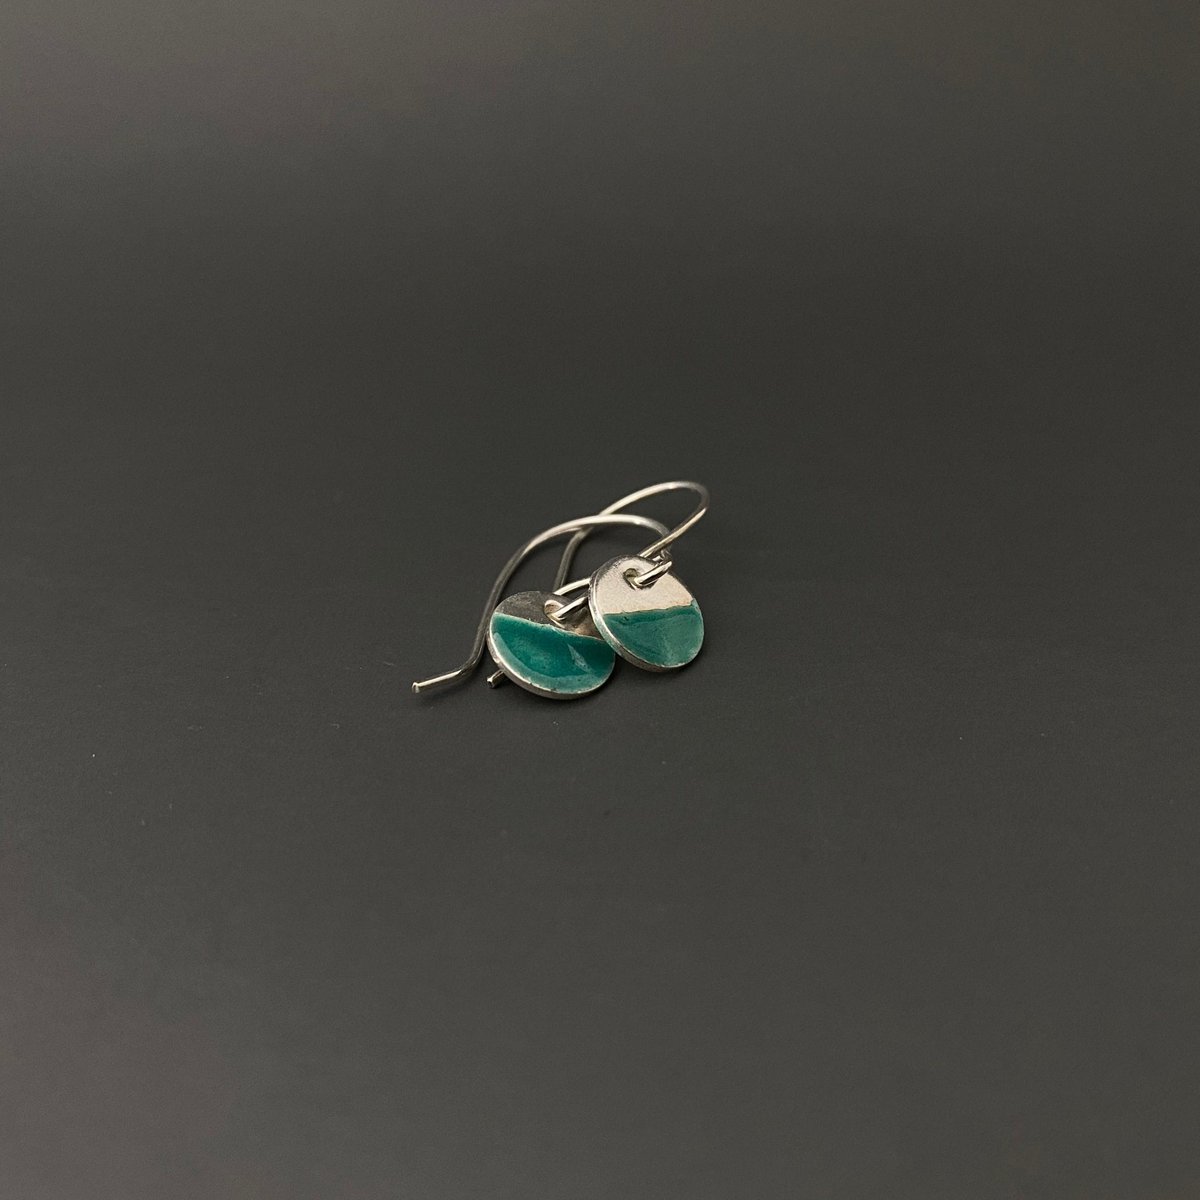 Two Tone Silver Disc Earrings - Small tuppu.net/a4318708 #HandmadeHour #inbizhour #MHHSBD #bizbubble #shopsmall #UKHashtags ##UKGiftHour #giftideas #SmallEarrings